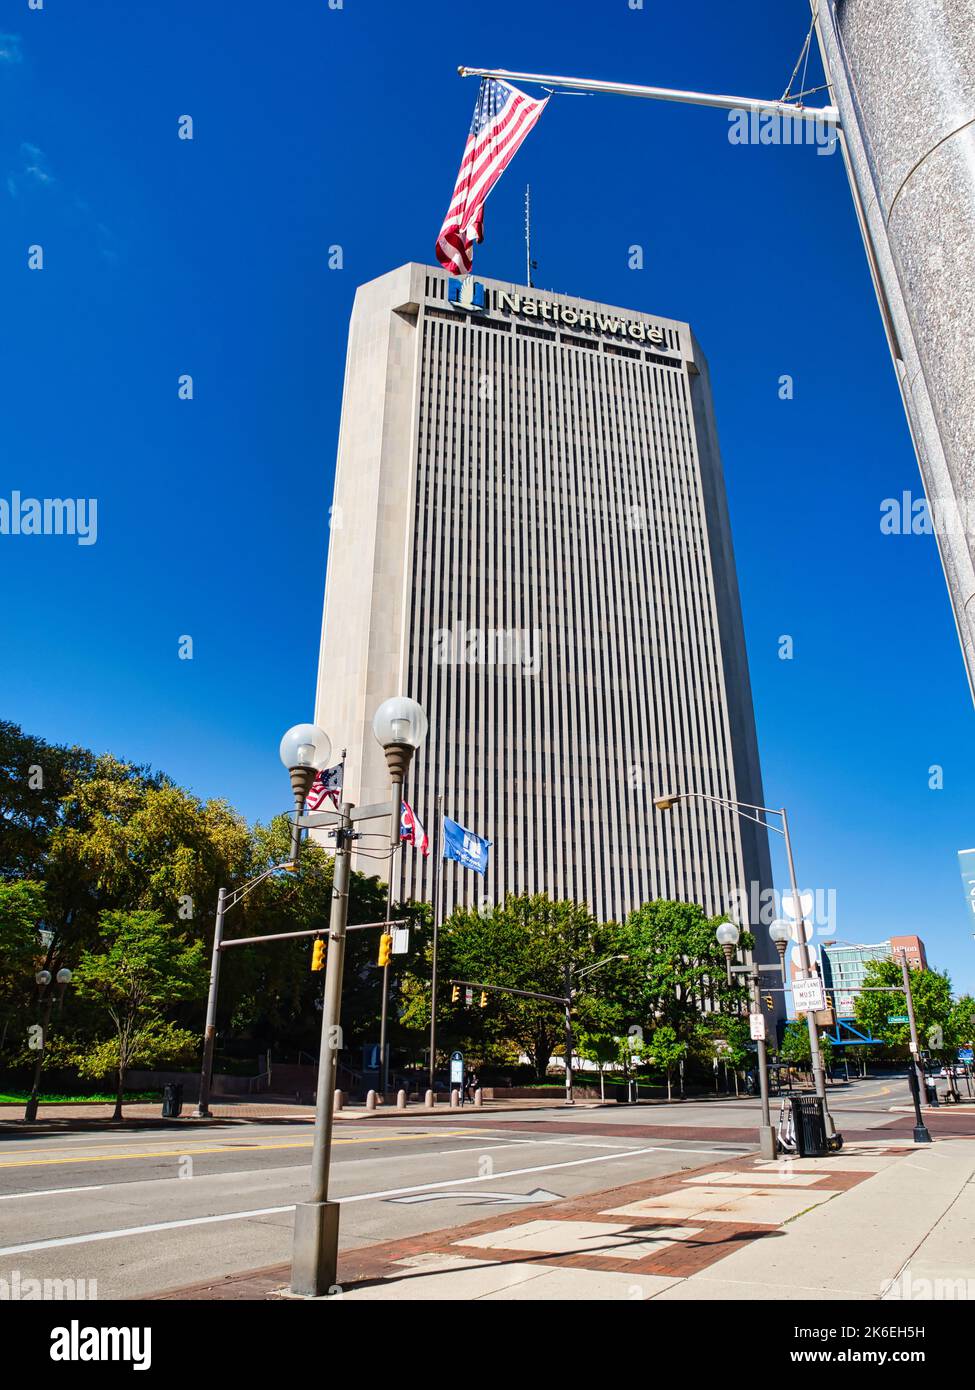 nationwide insurance building columbus Ohio downtown Stock Photo